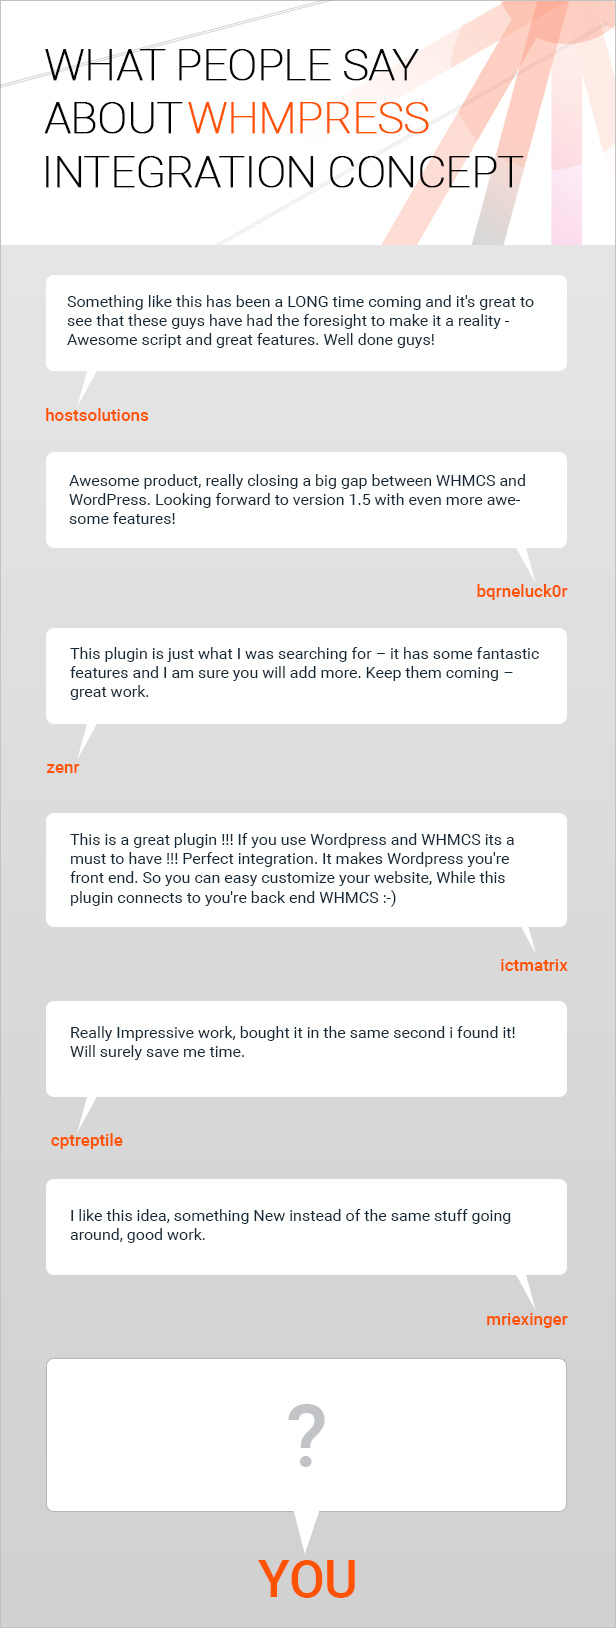 What People Say about WHMpress (WHMCS WordPress) Integration Concept